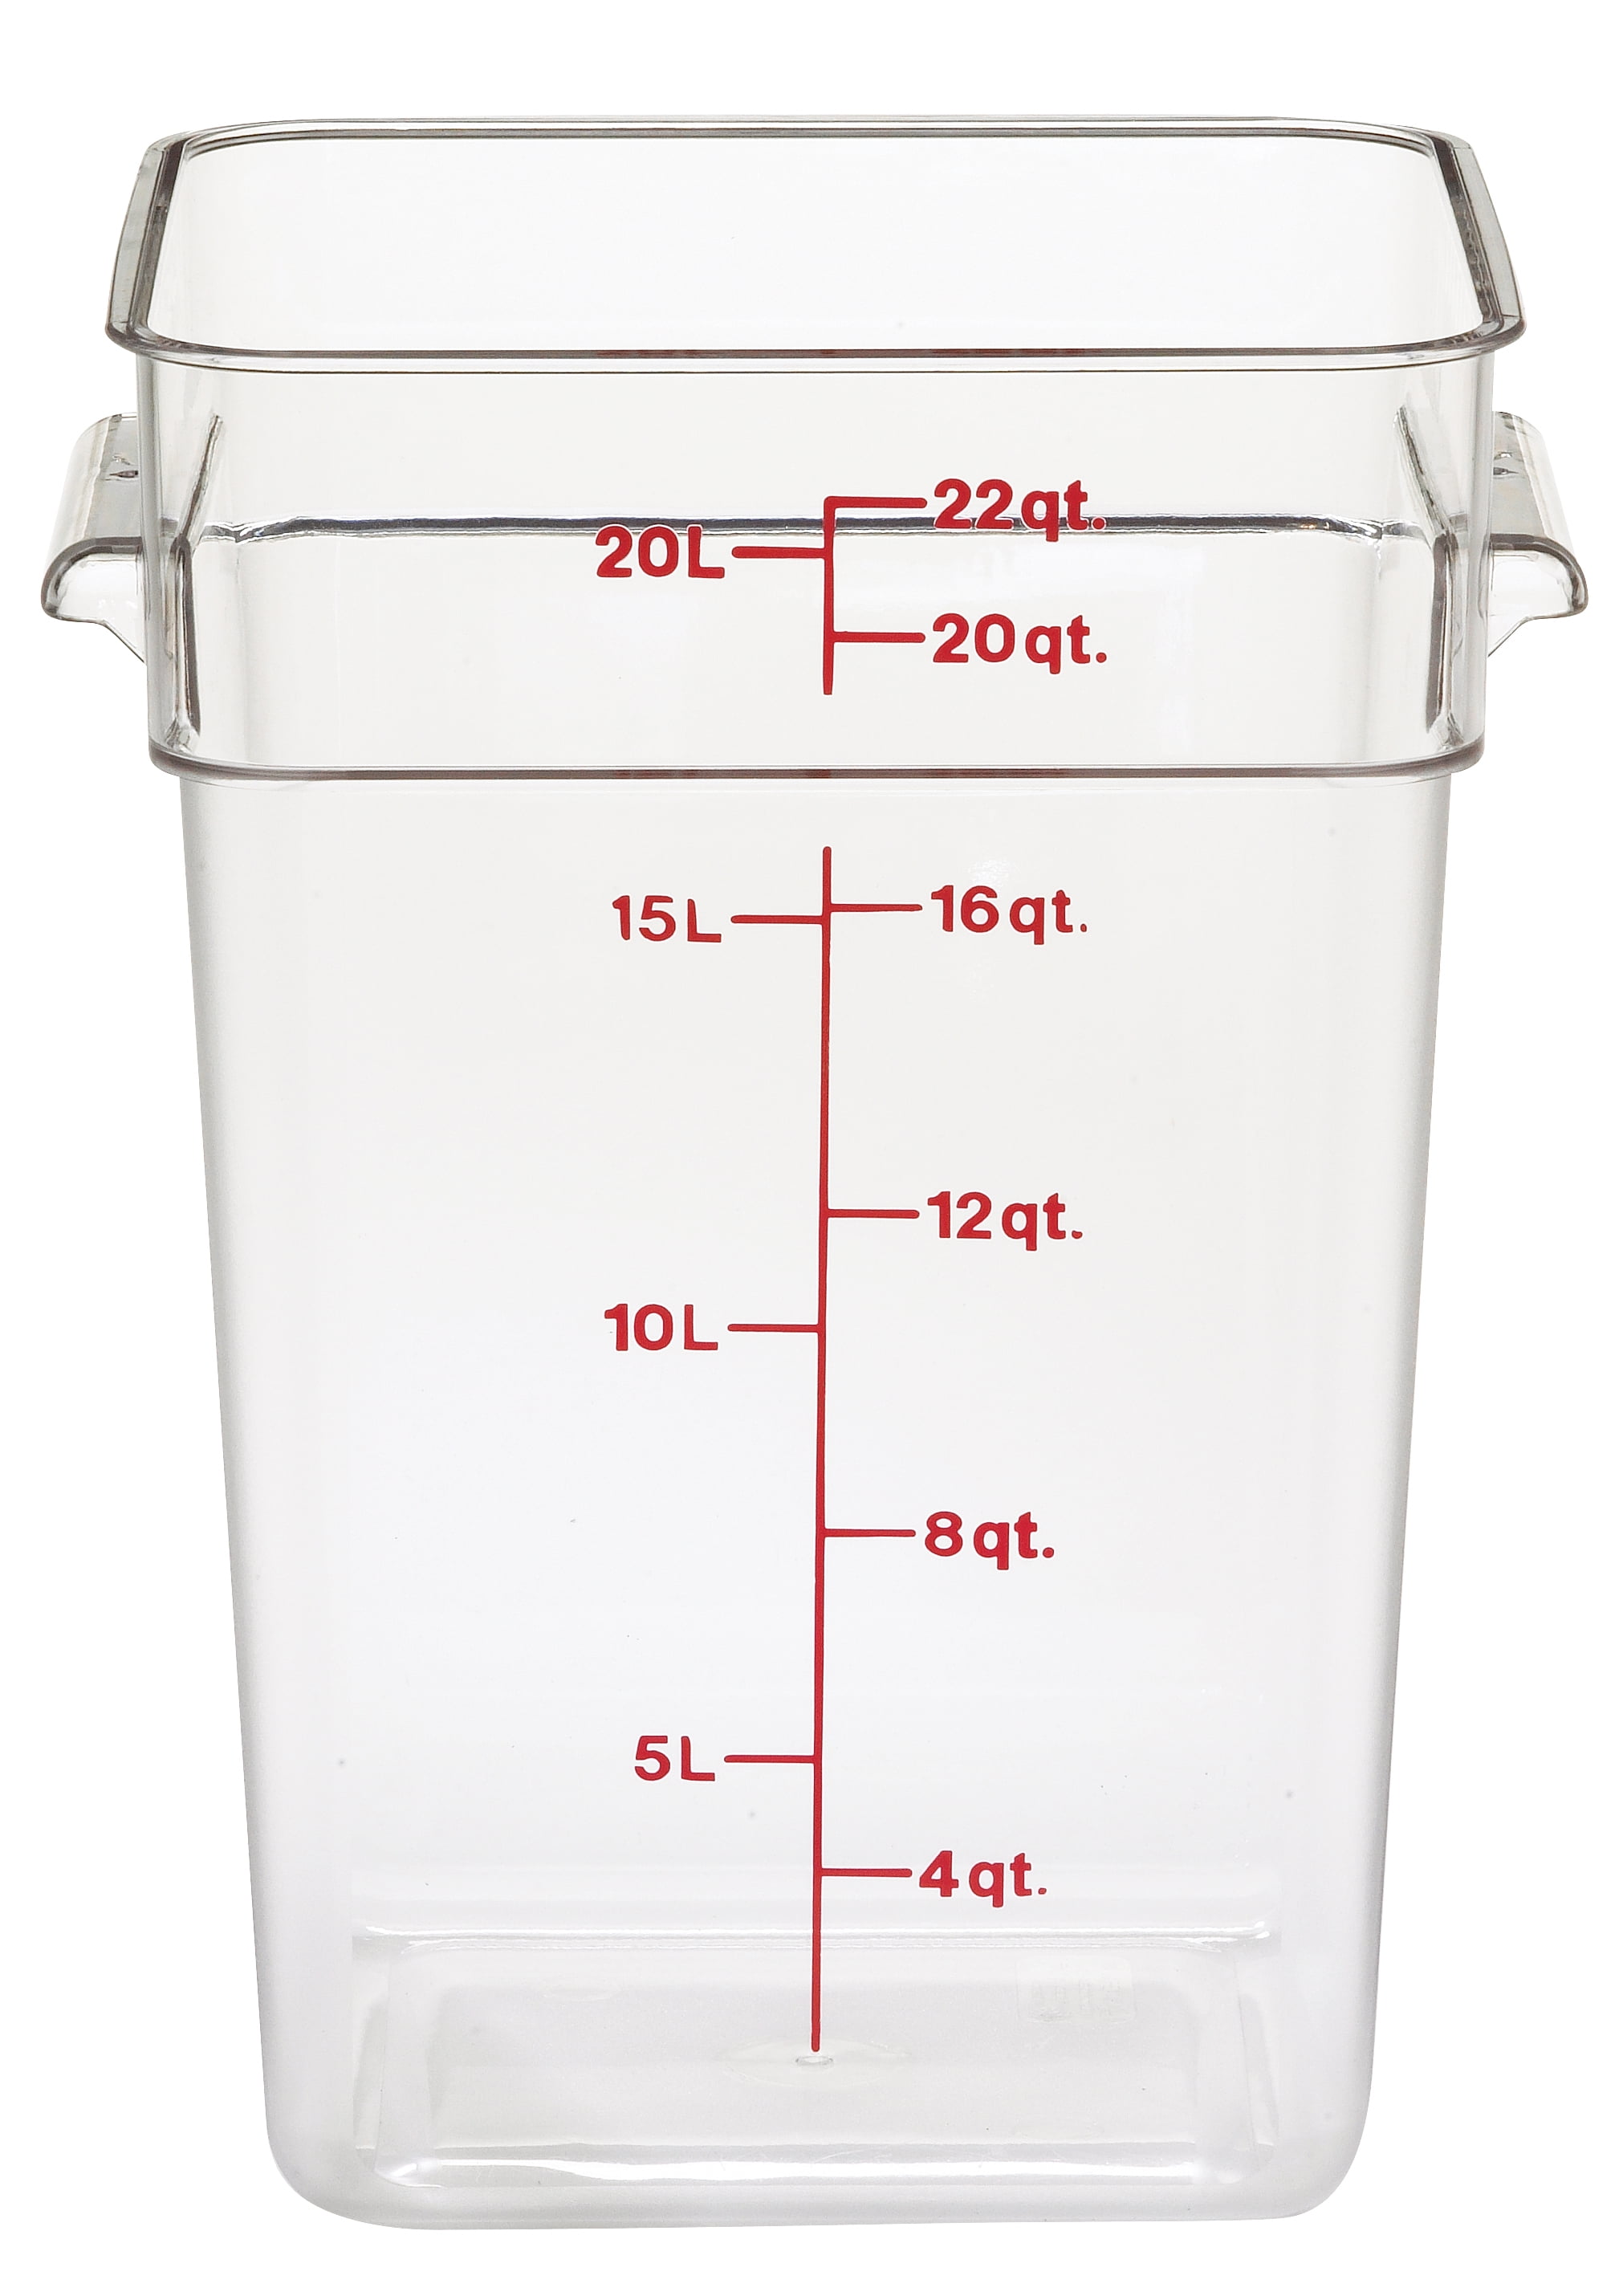 Excellante 8-Quart Polycarbonate Square Food Storage Containers, Clear